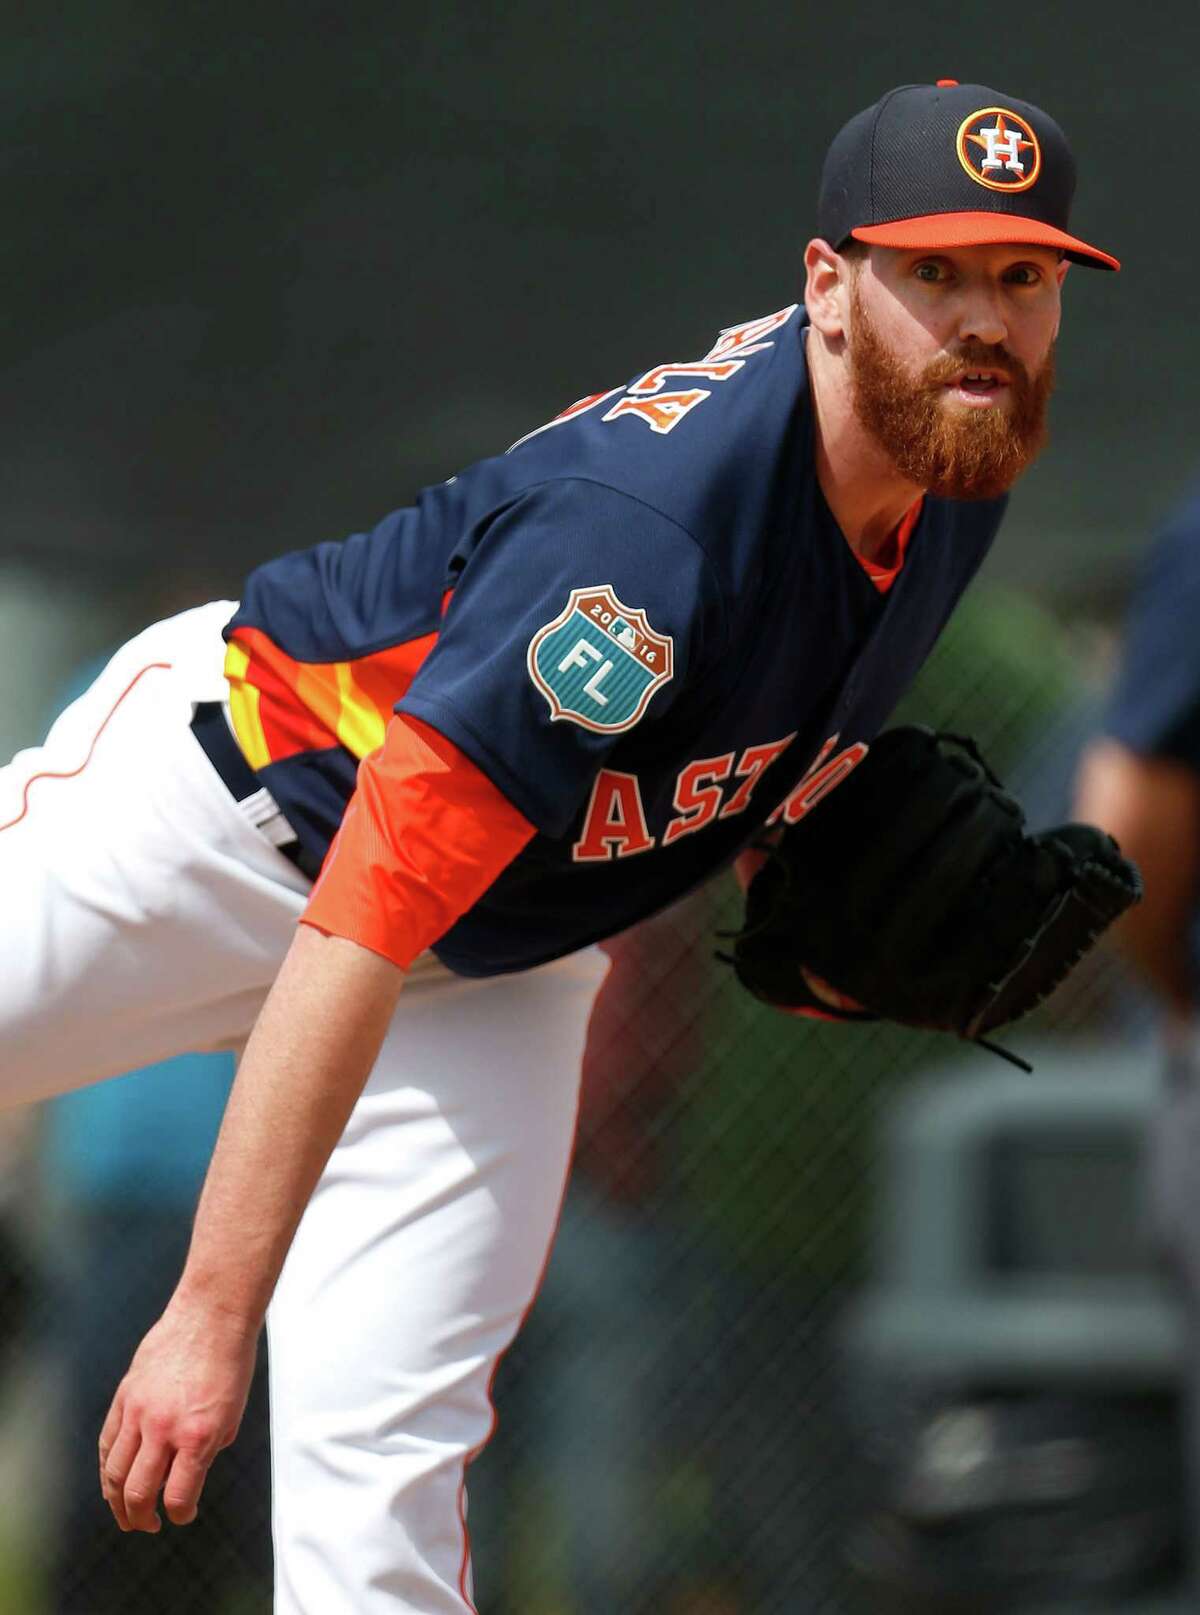 Houston Astros pitcher Dan Straily pitches during the first workout for Houston Astros pitchers and catchers for spring training in Kissimmee, Florida, Friday, Feb. 19, 2016.